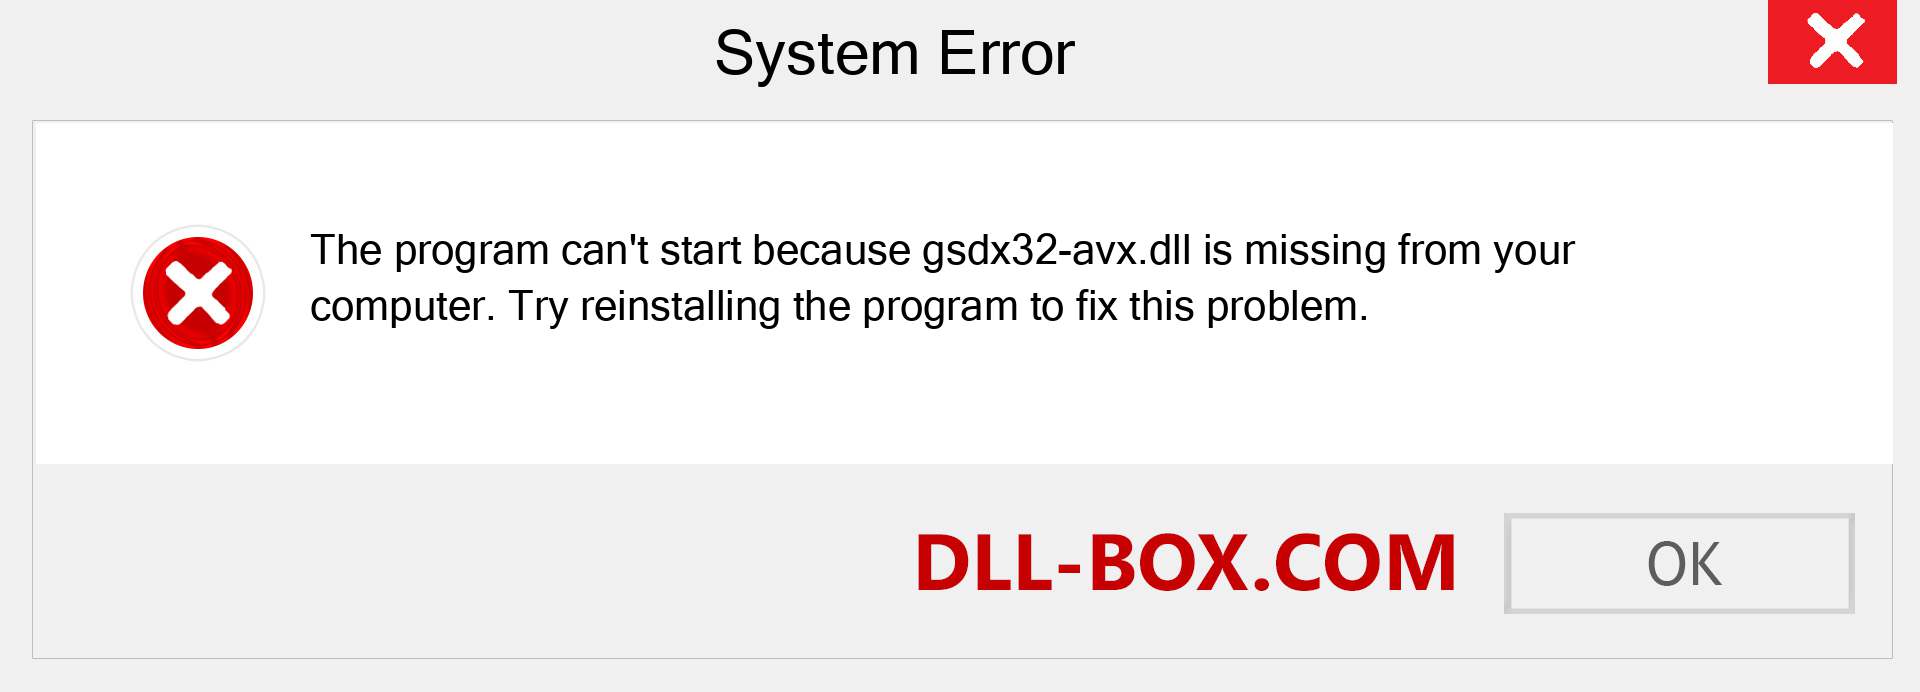  gsdx32-avx.dll file is missing?. Download for Windows 7, 8, 10 - Fix  gsdx32-avx dll Missing Error on Windows, photos, images